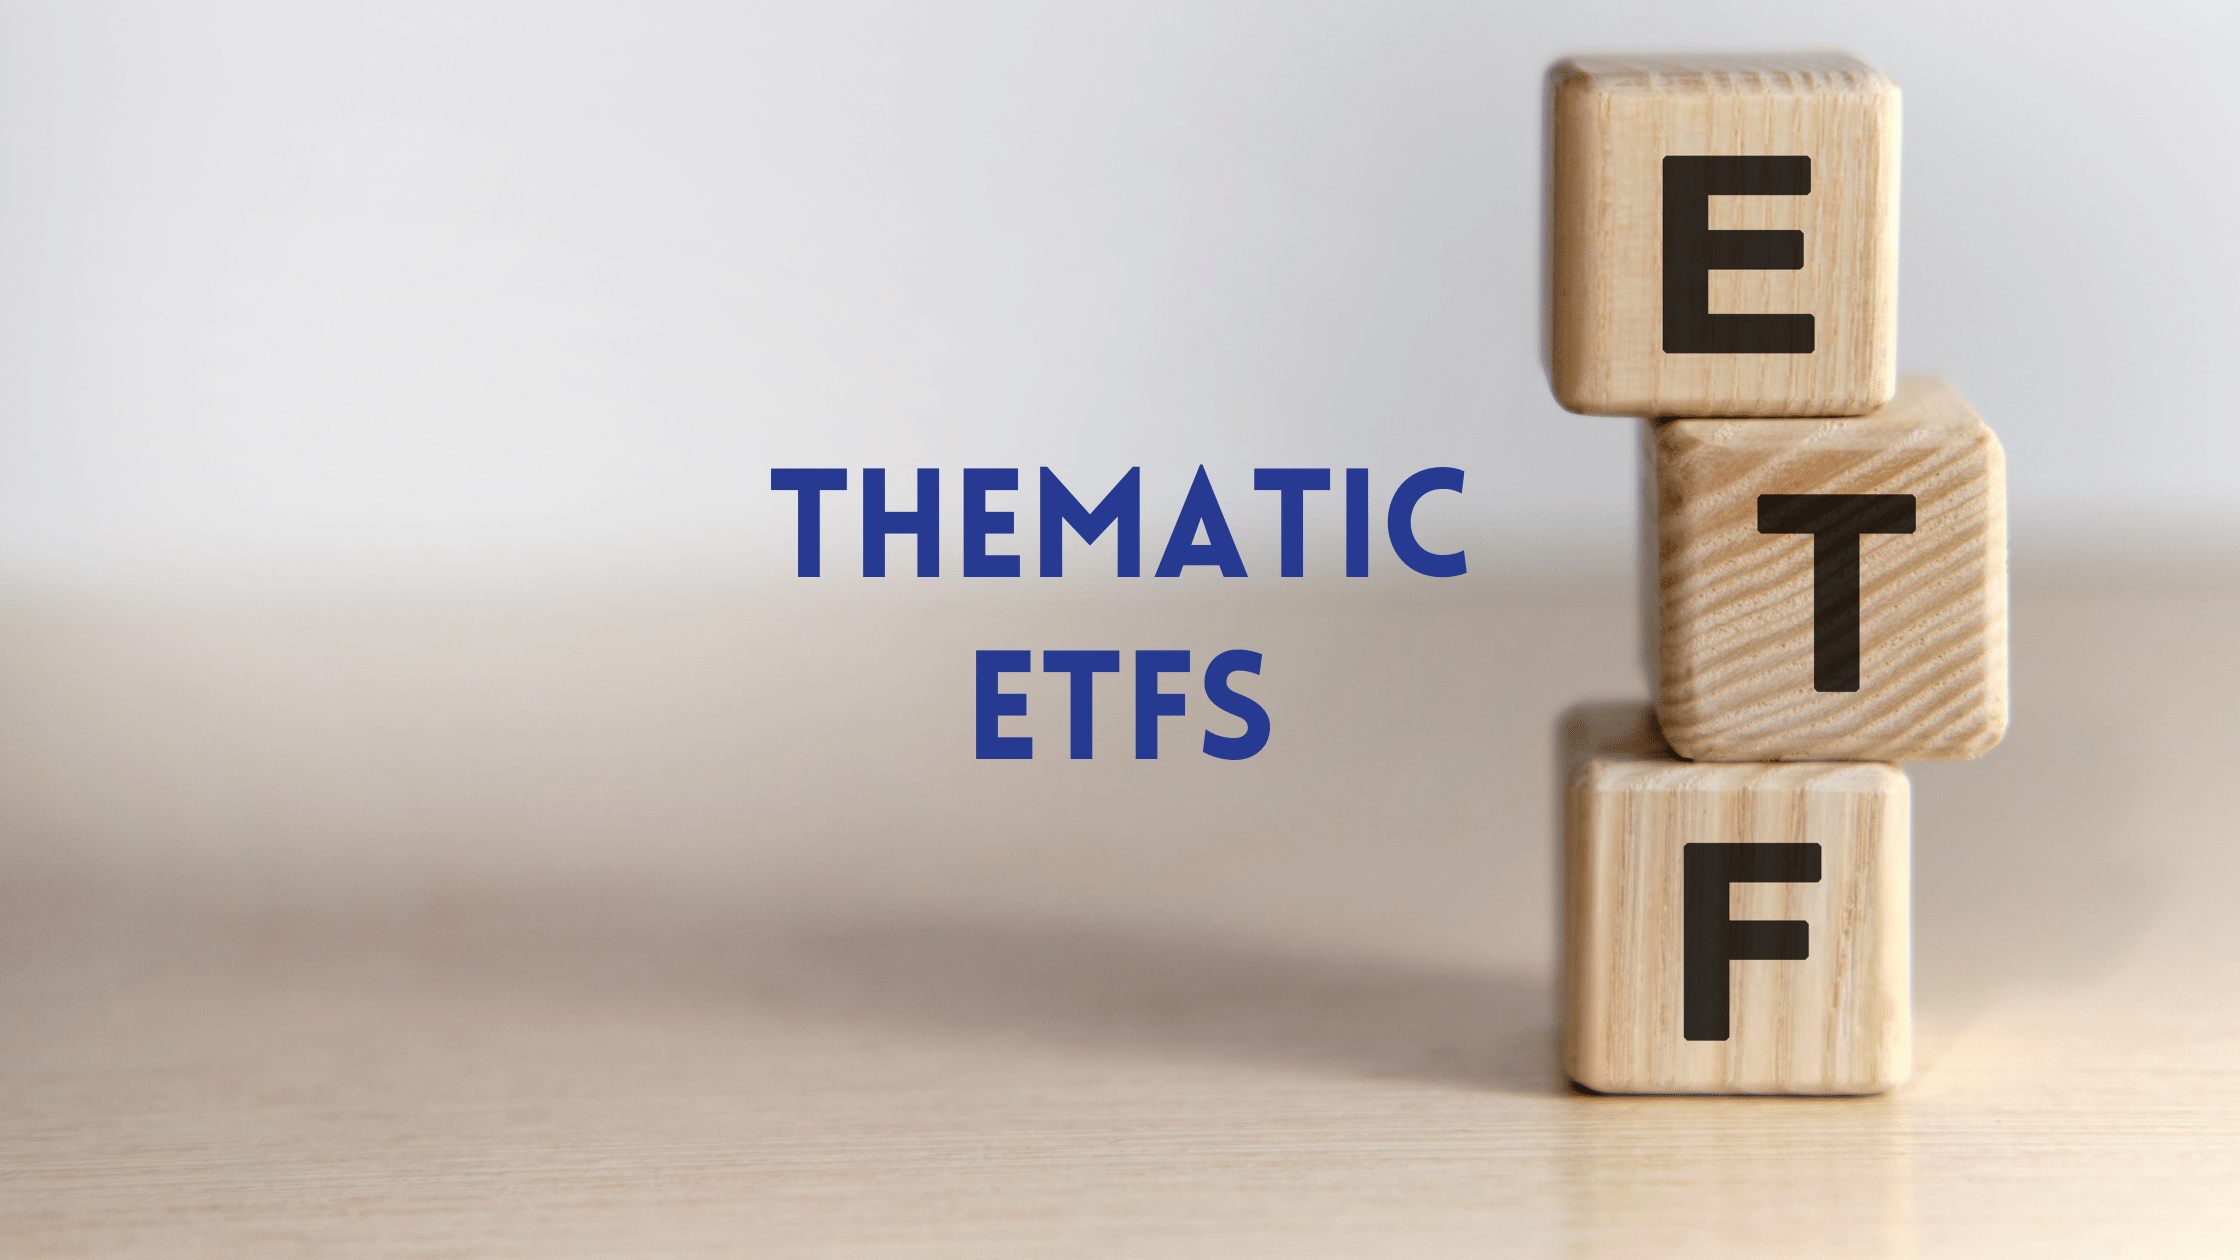 Thematic ETFs: Opportunities and Risks for Investors